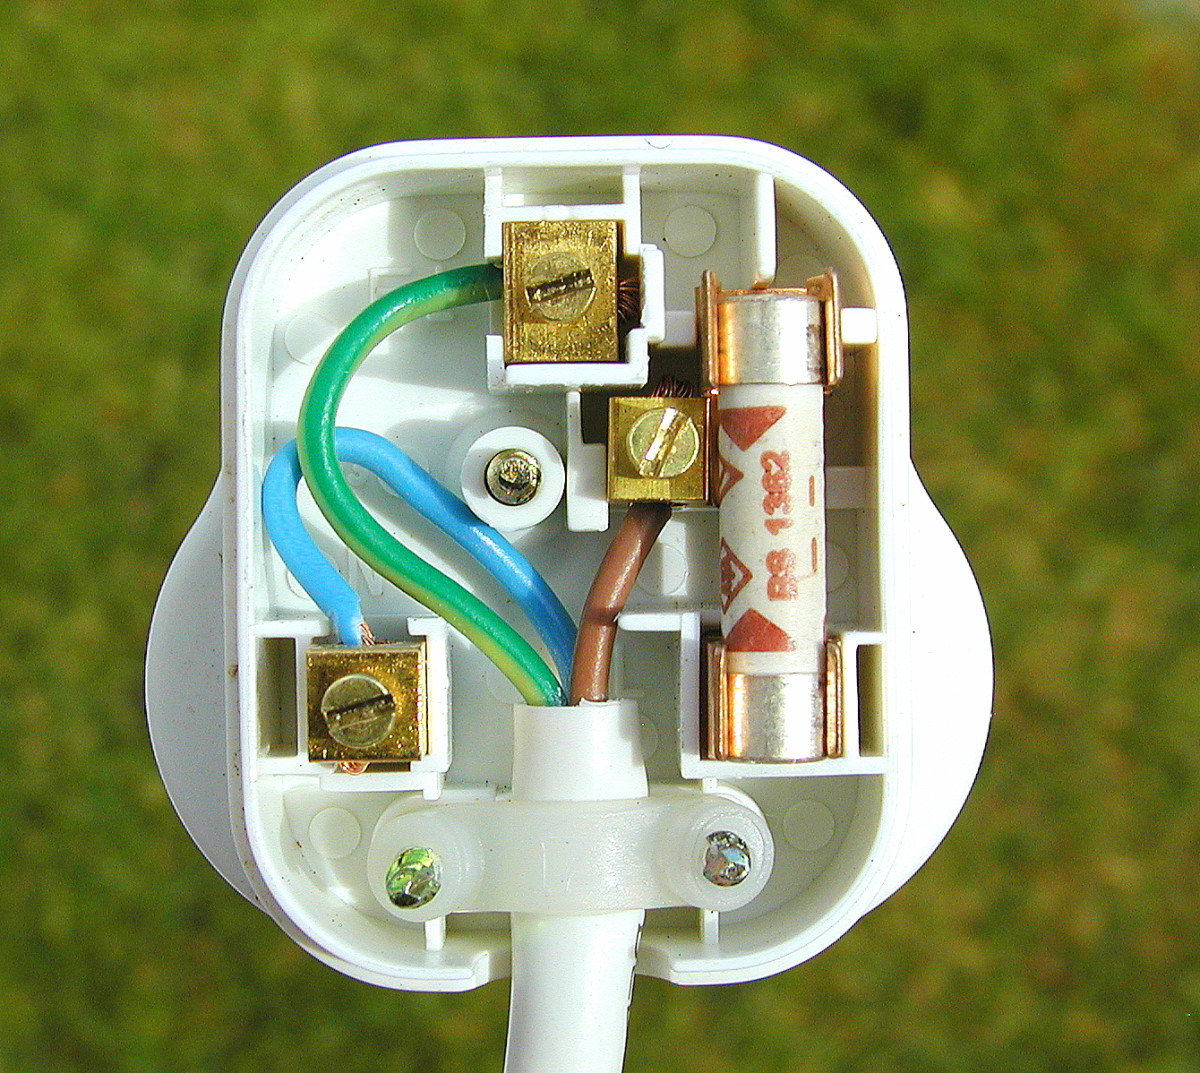 9 Easy Steps to Wiring a Plug Correctly and Safely | Dengarden wiring diagram fan symbol 